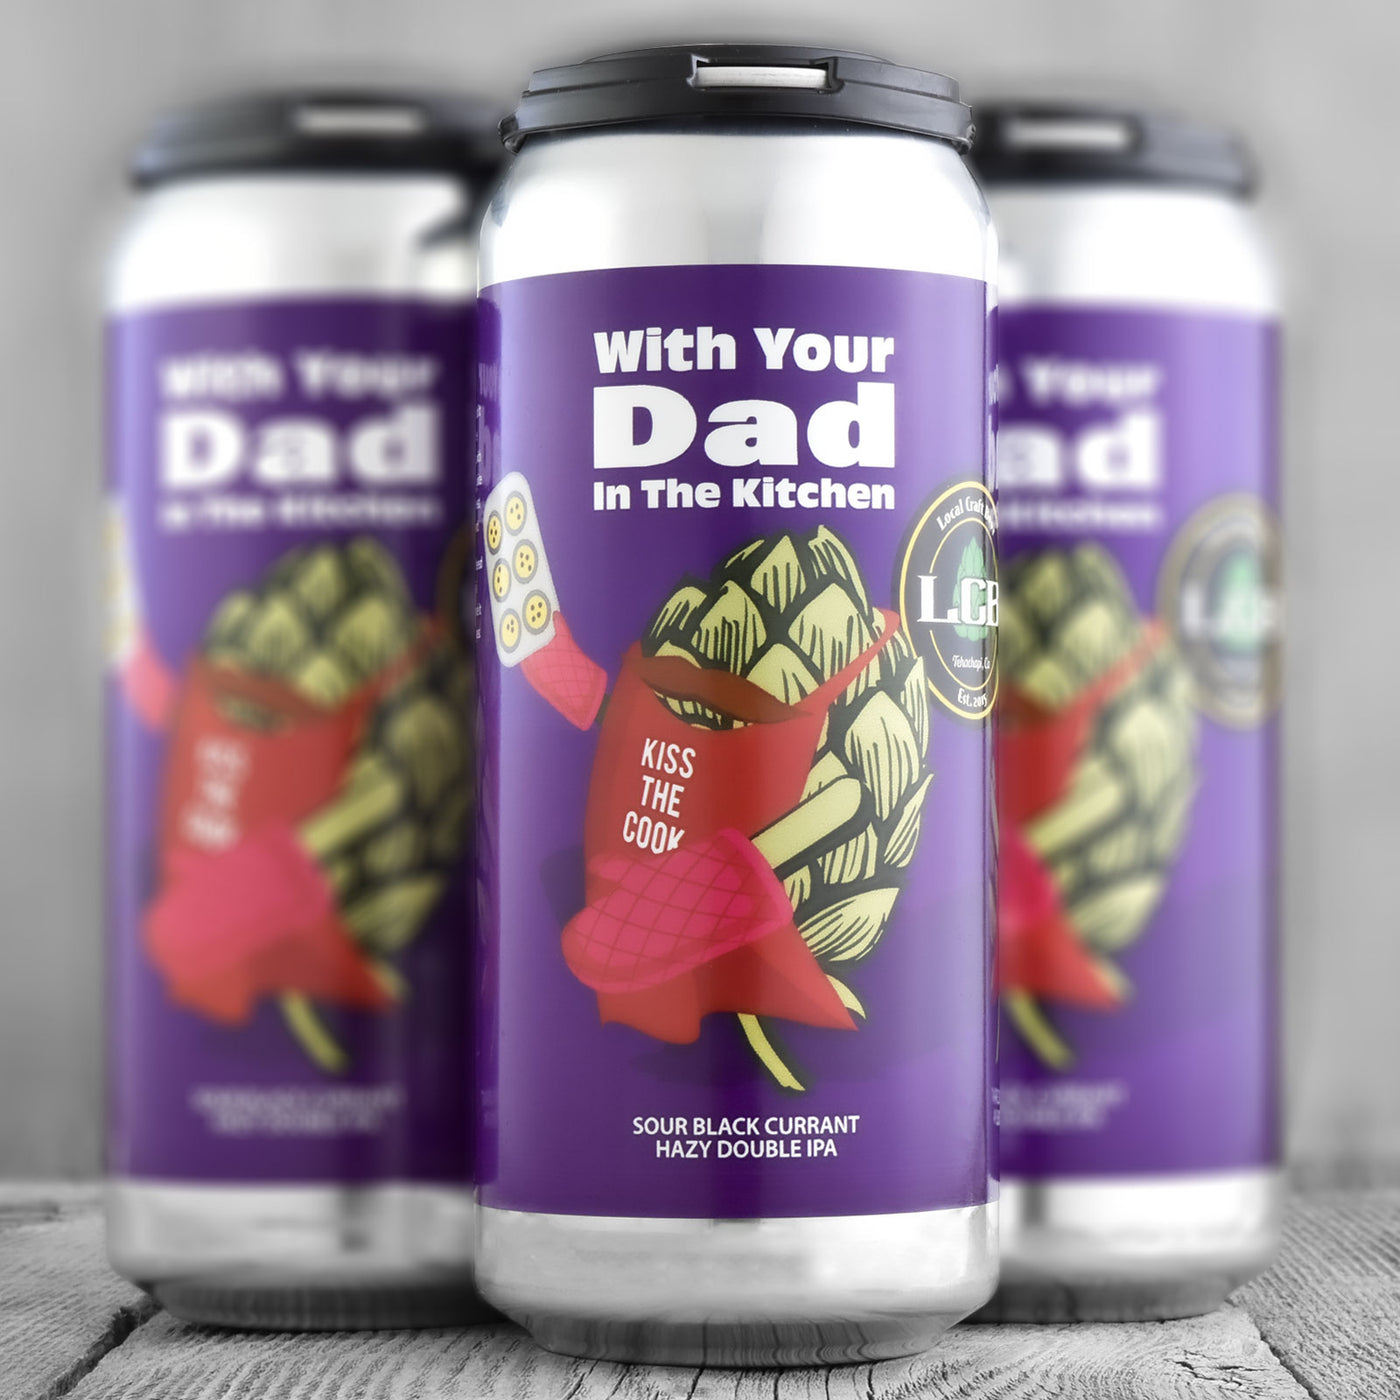 Local Craft Beer With your Dad in the Kitchen